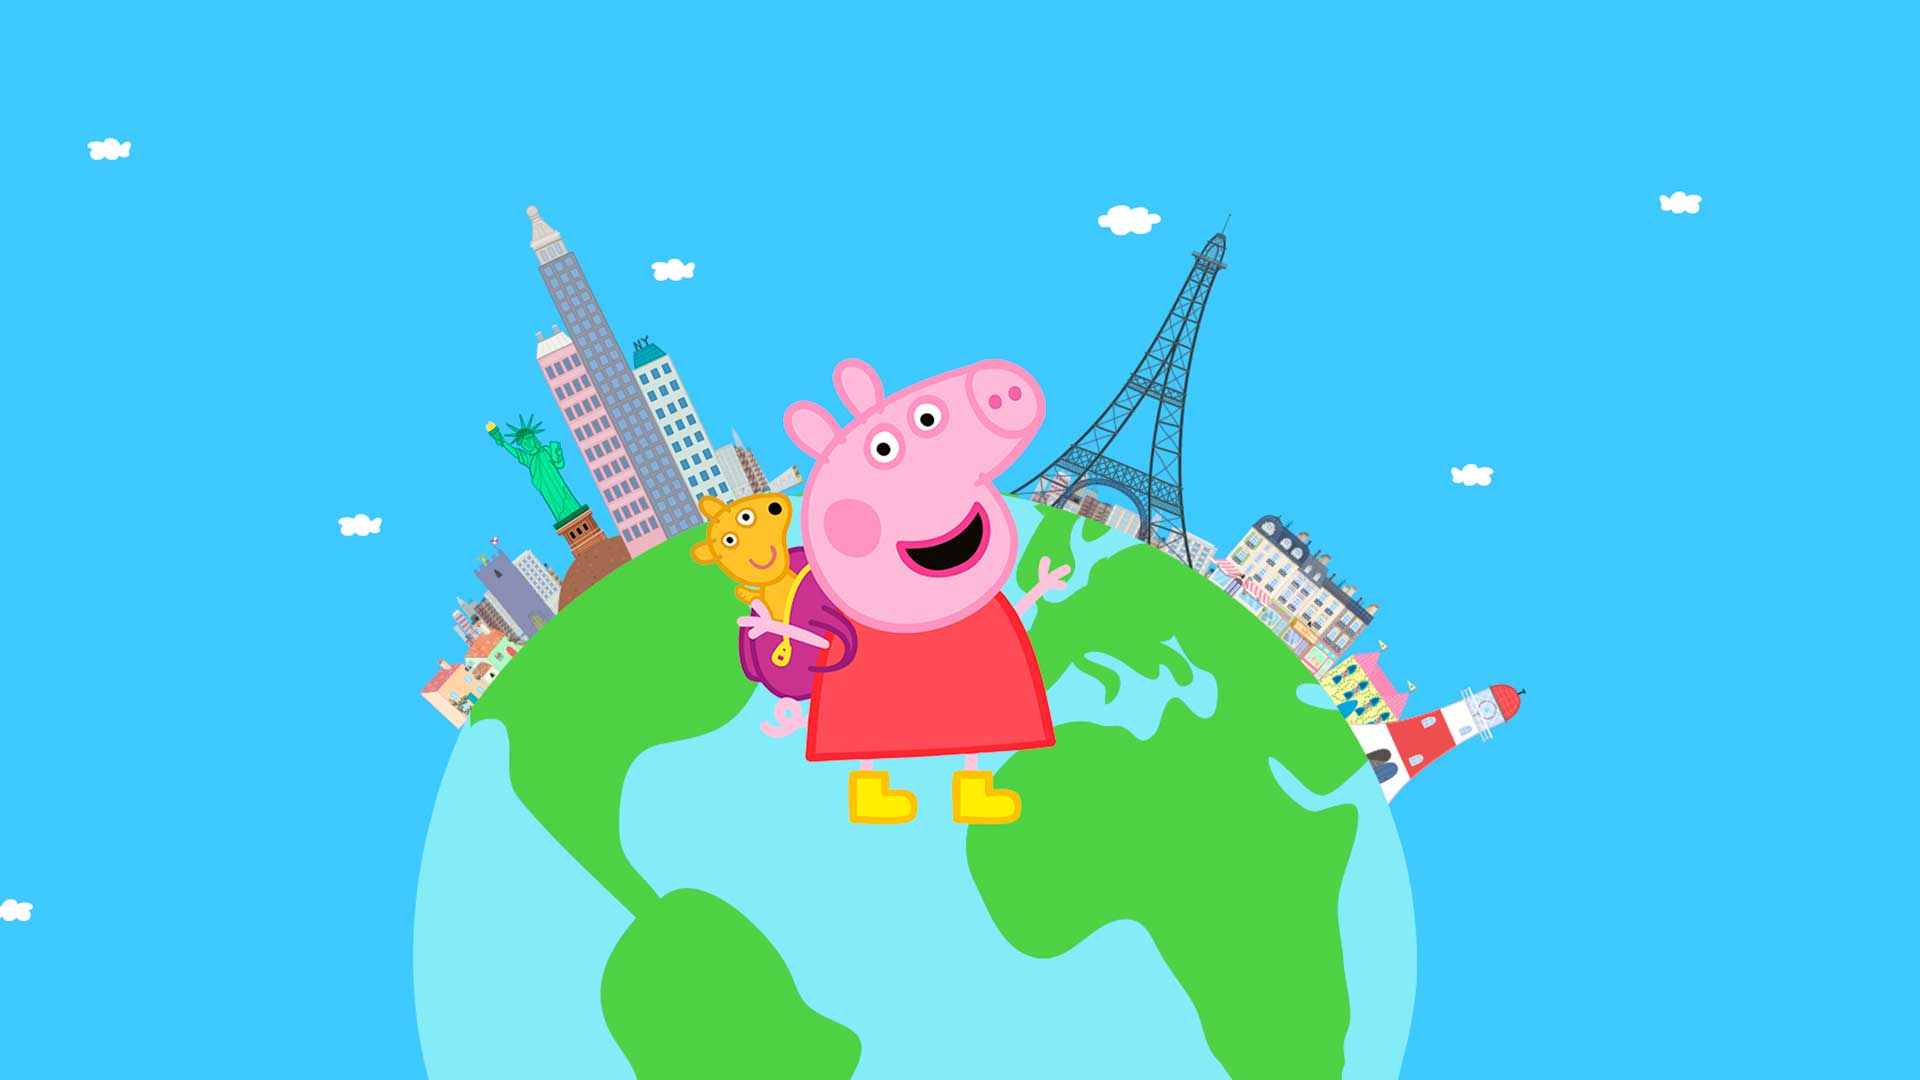 Baby games with Peppa APK Download for Android Free